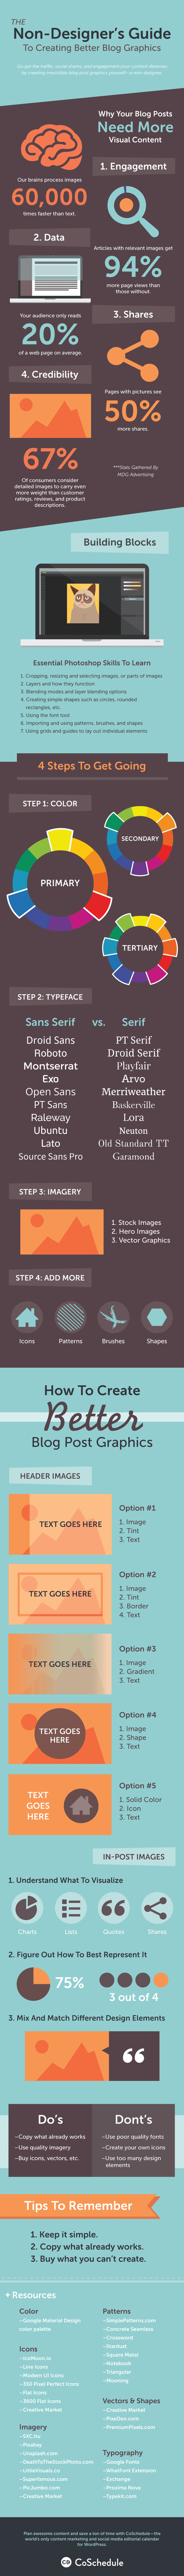 the non-designer's guide to creating blog graphics infographic